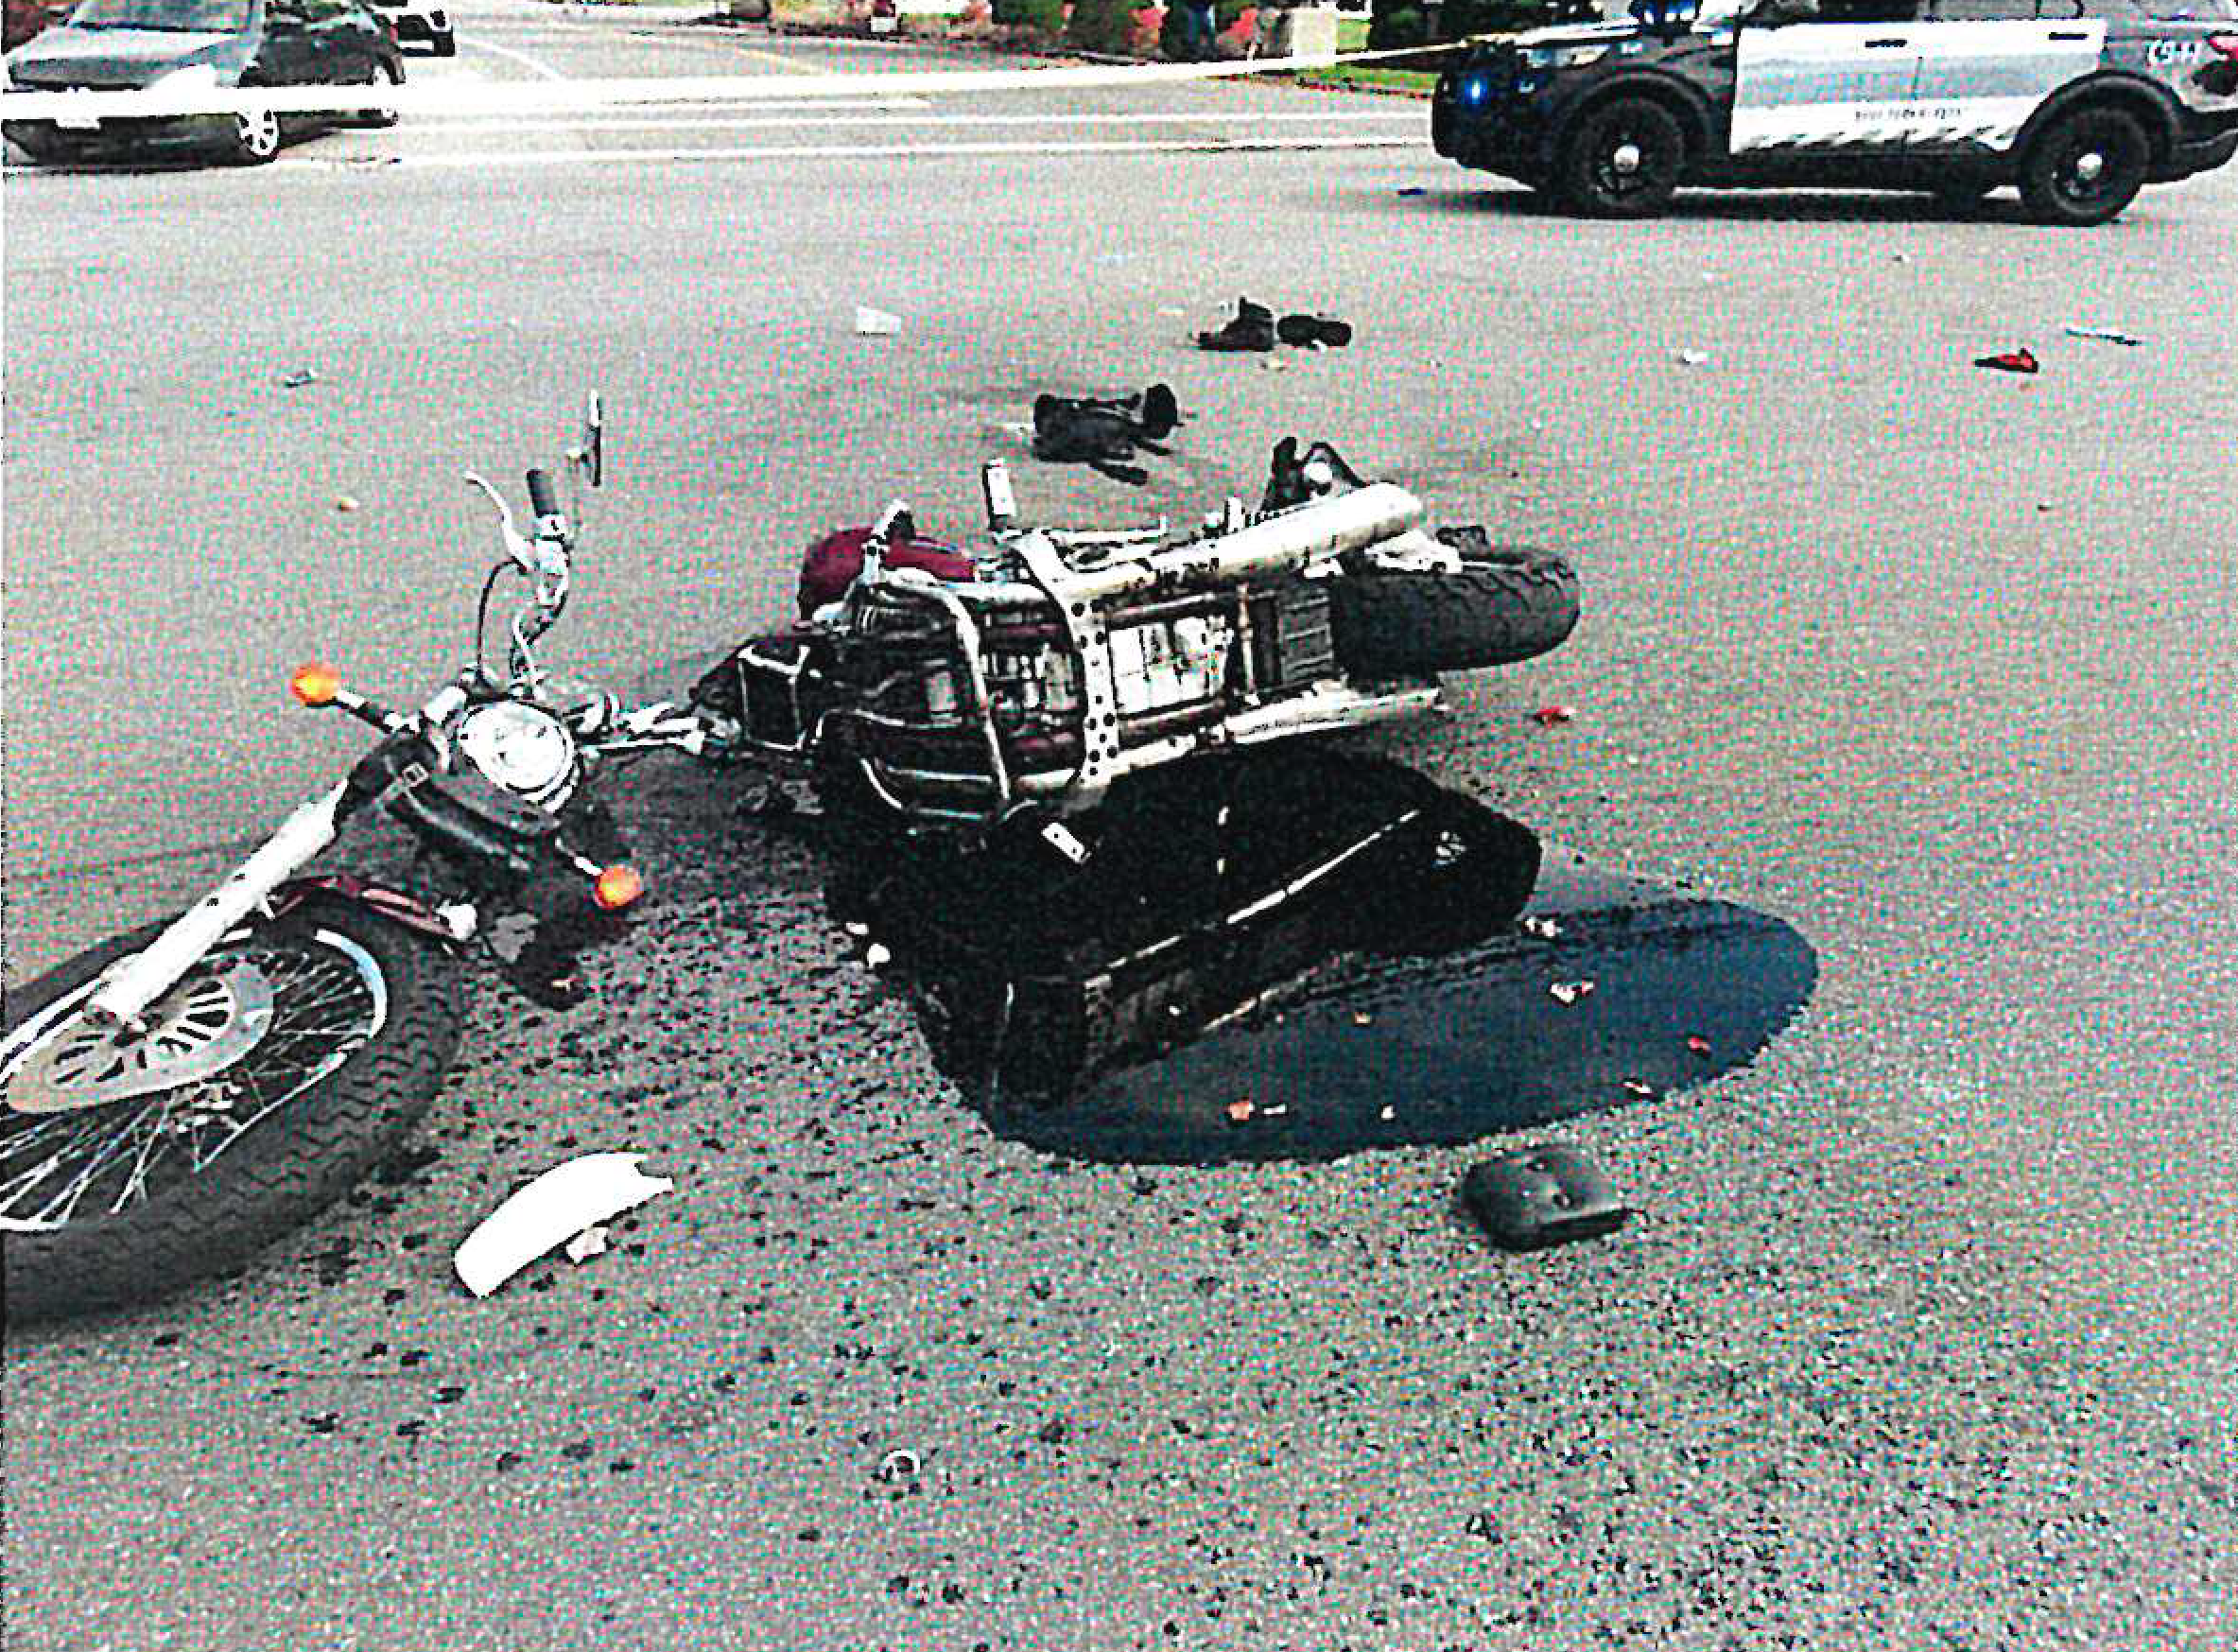 Motorcycle accident image